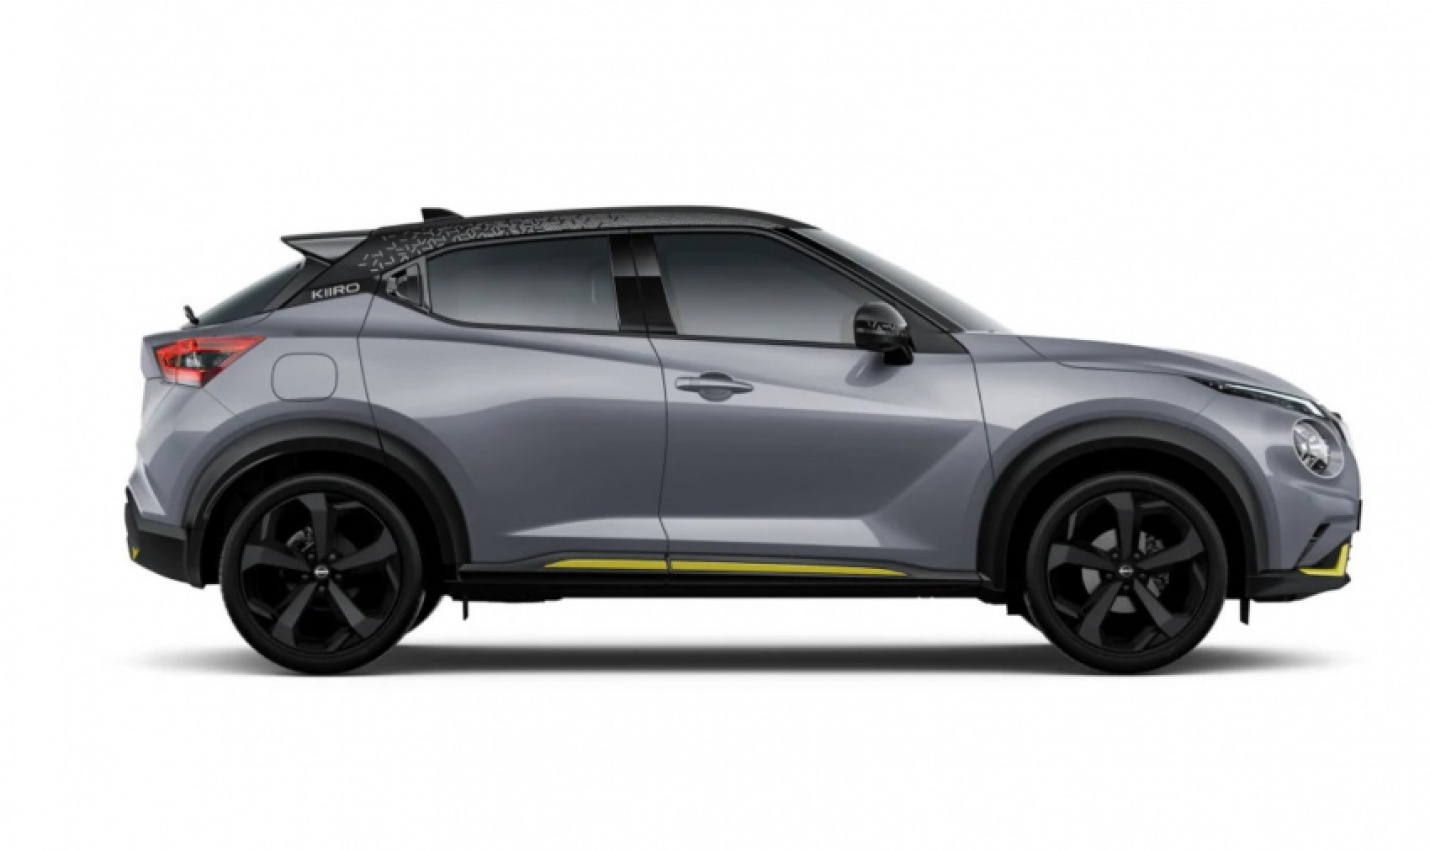 autos, car news, cars, news, nissan, amazon, android, nissan juke, suvs, amazon, android, nissan juke kiiro special edition revealed